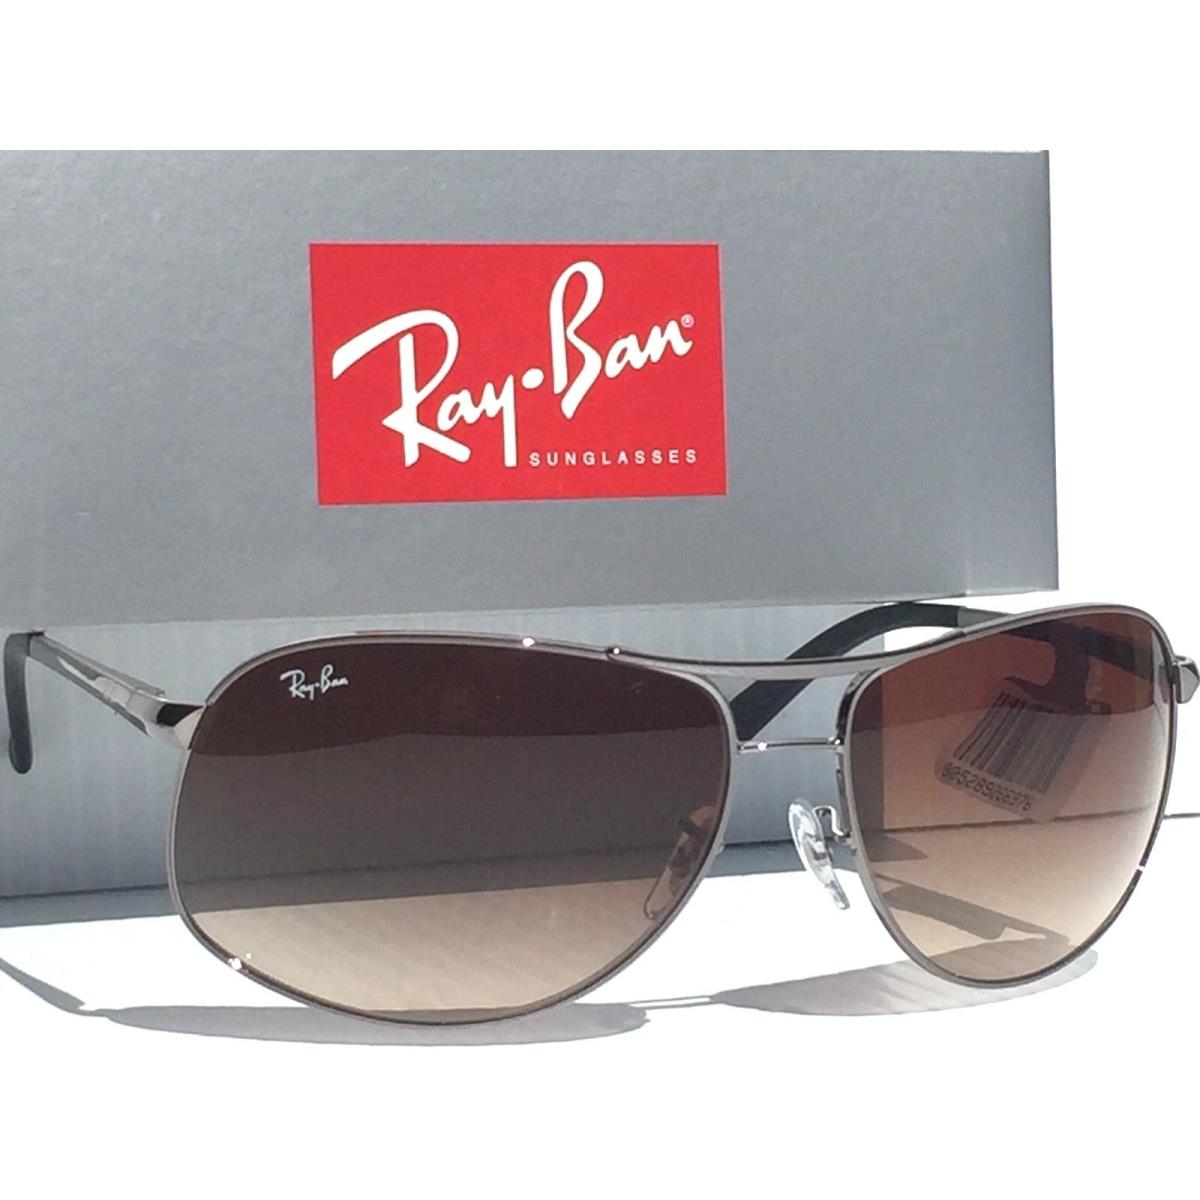 Ray Ban Aviator Silver 64mm w Brown Gradient Sunglass RB 3387 004